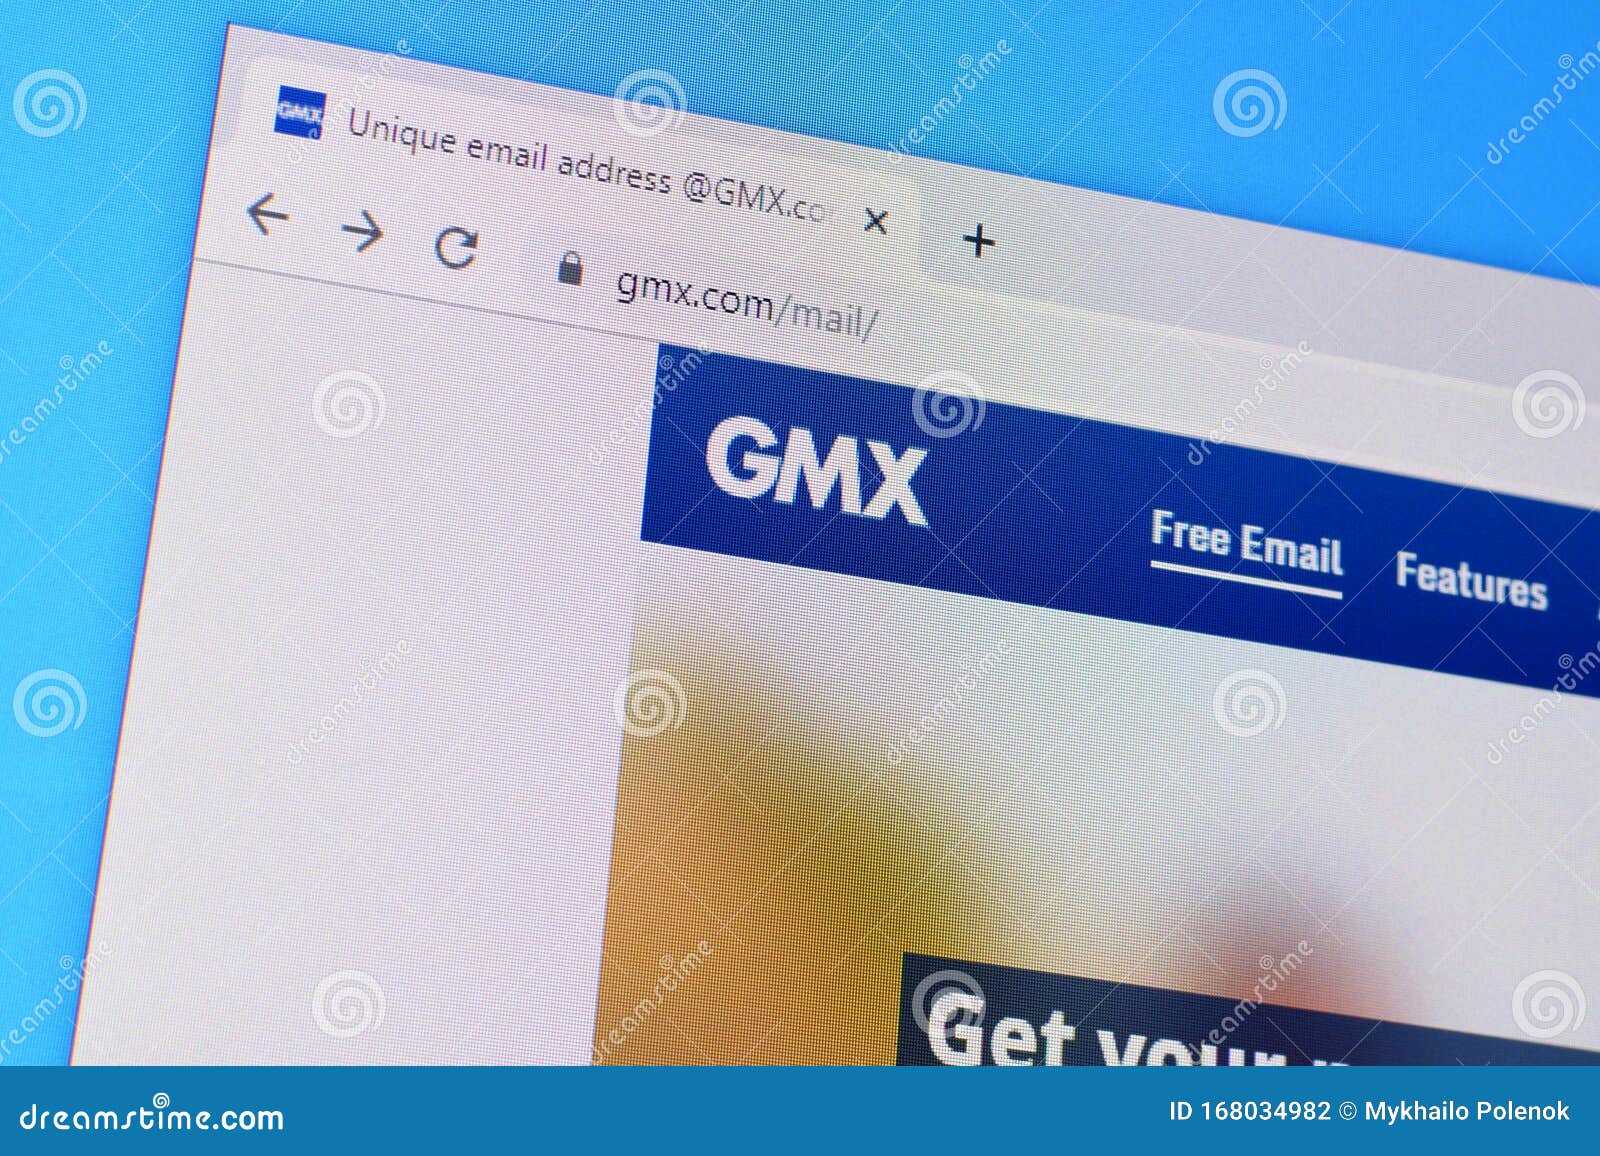 Gmx free login mail Unique email